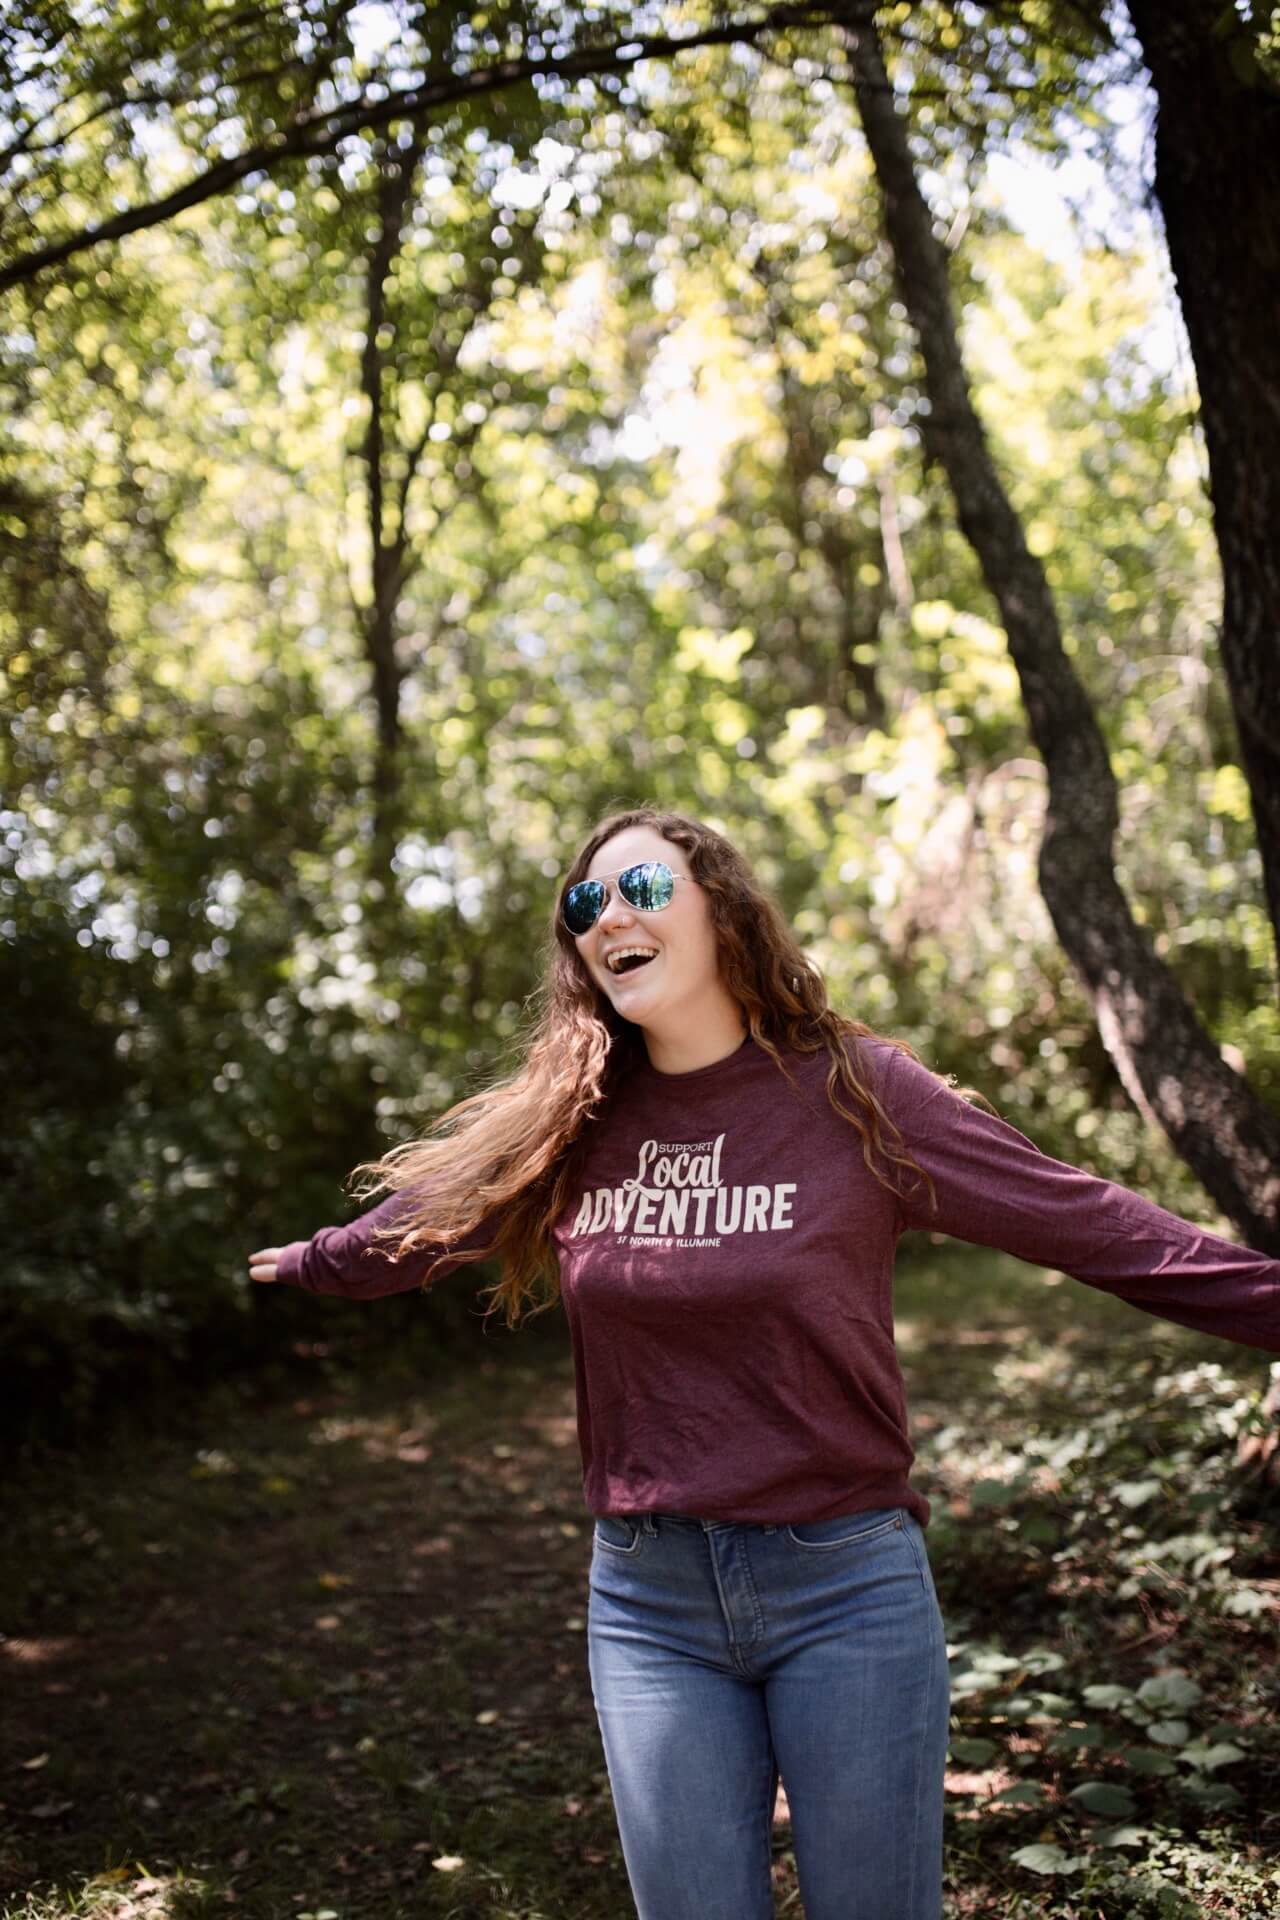 Illumine Collect Adventure Inspired Apparel To Build Outdoor Communities That Give Back